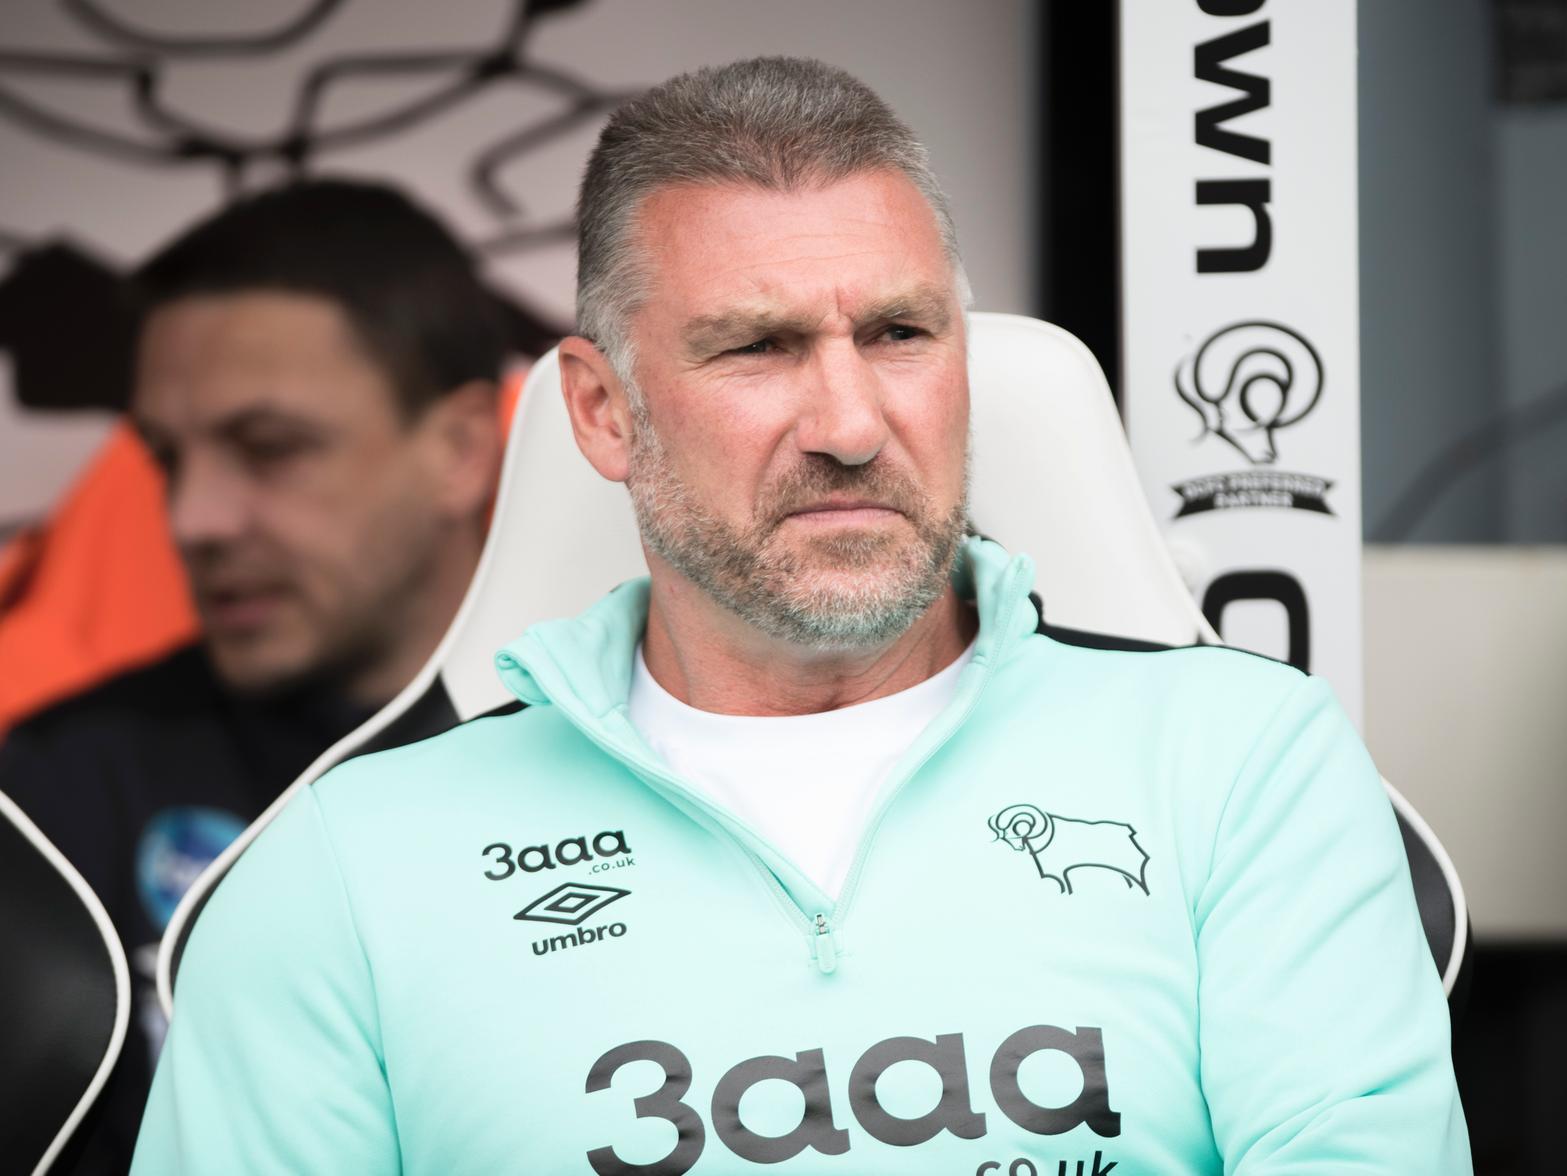 Pearson left Derby after having an argument with owner Mel Morris. He has also been somewhat of a journeyman manager with spells at Leicester, Hull and Southampton before Derby. He was most recently boss at Bristol City but is now unemployed. 